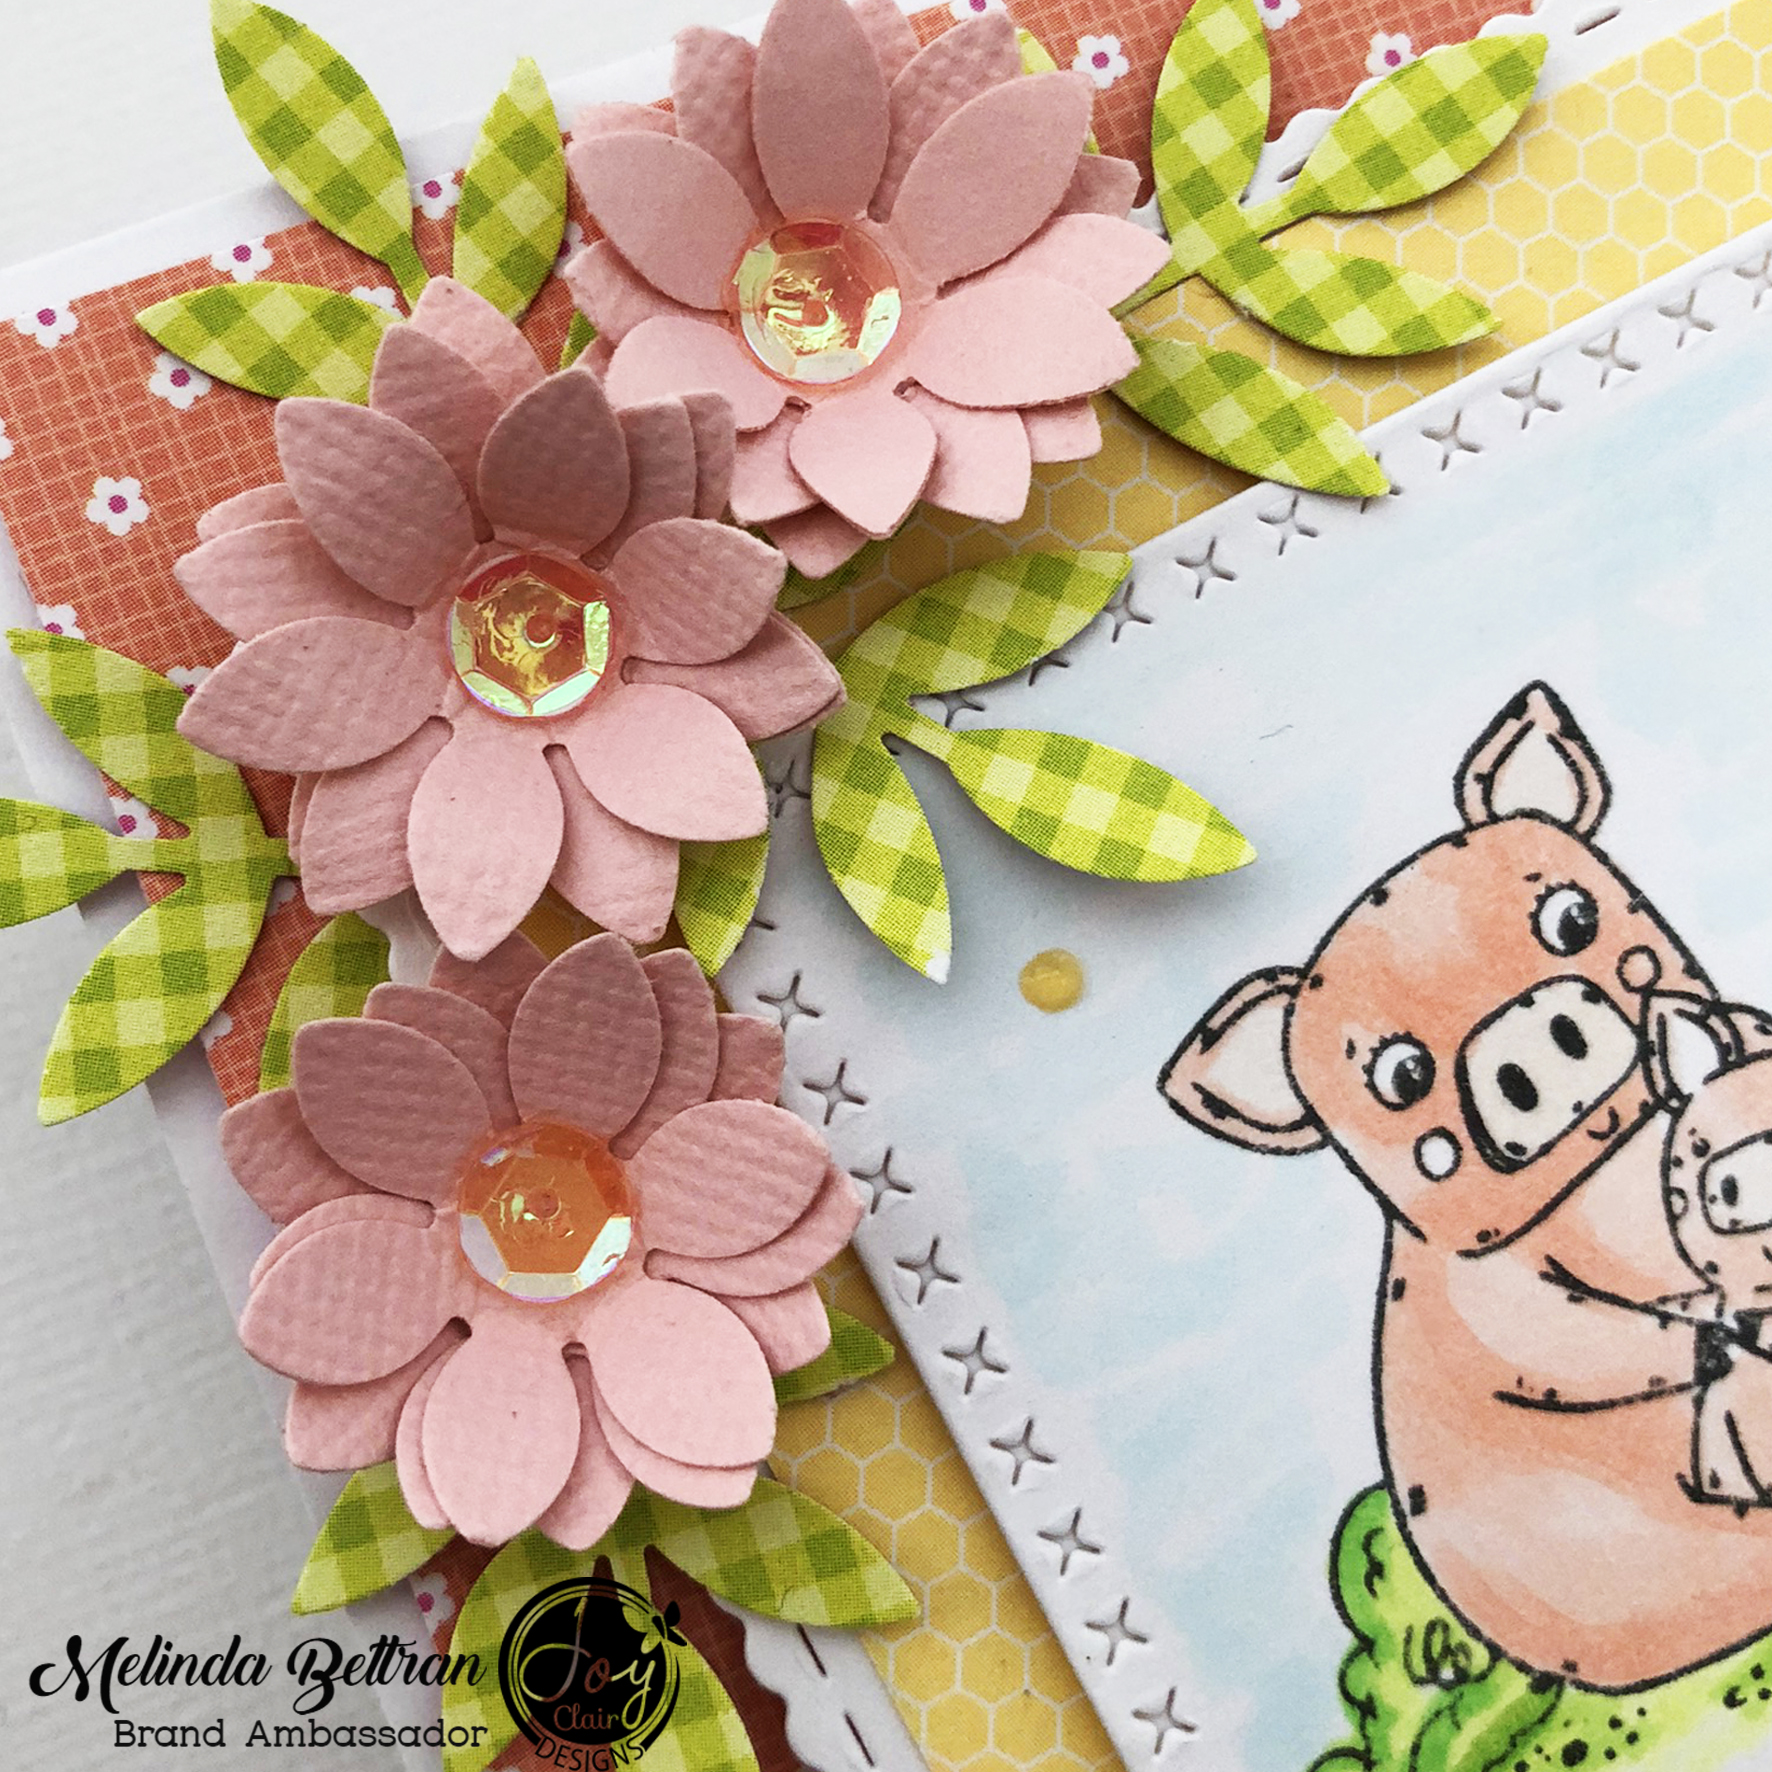 To embellish an easy diy mother's day card you can add cut flowers, sequins and drops in specific parts or layers.d sequins to this easy diy mother's day card makes it more special.